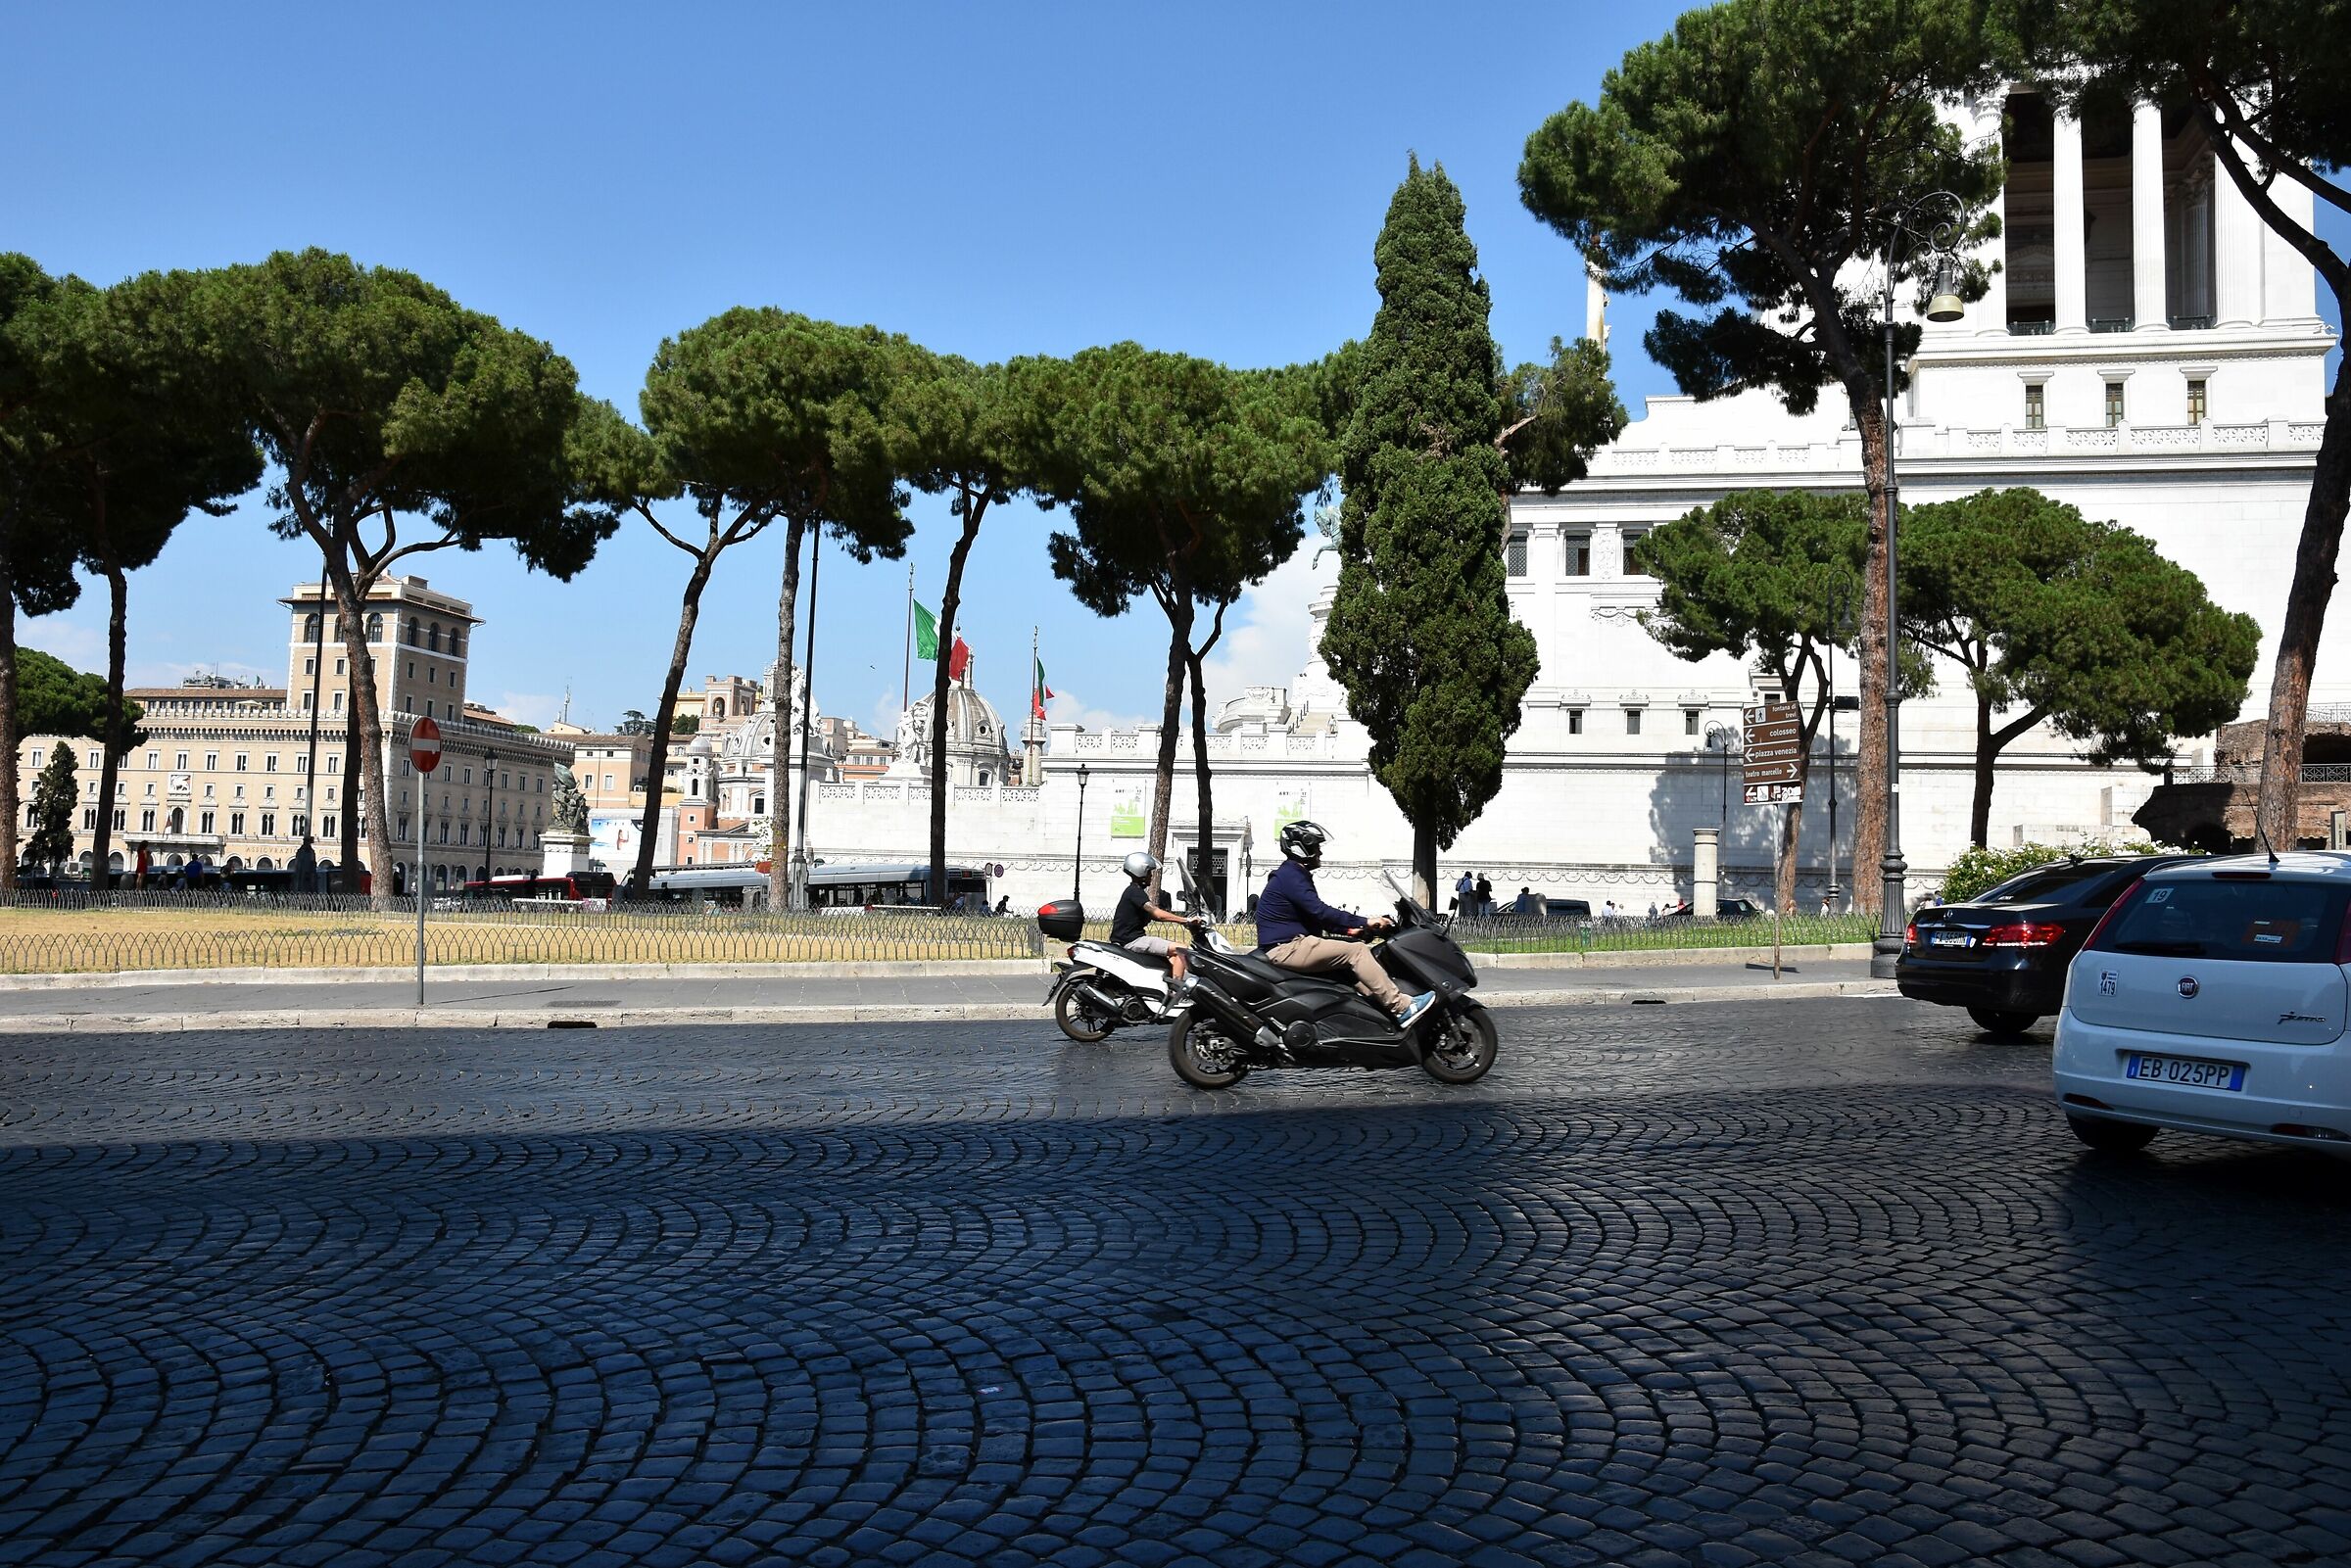 Towards the Capitoline Museums and Capitol Square...